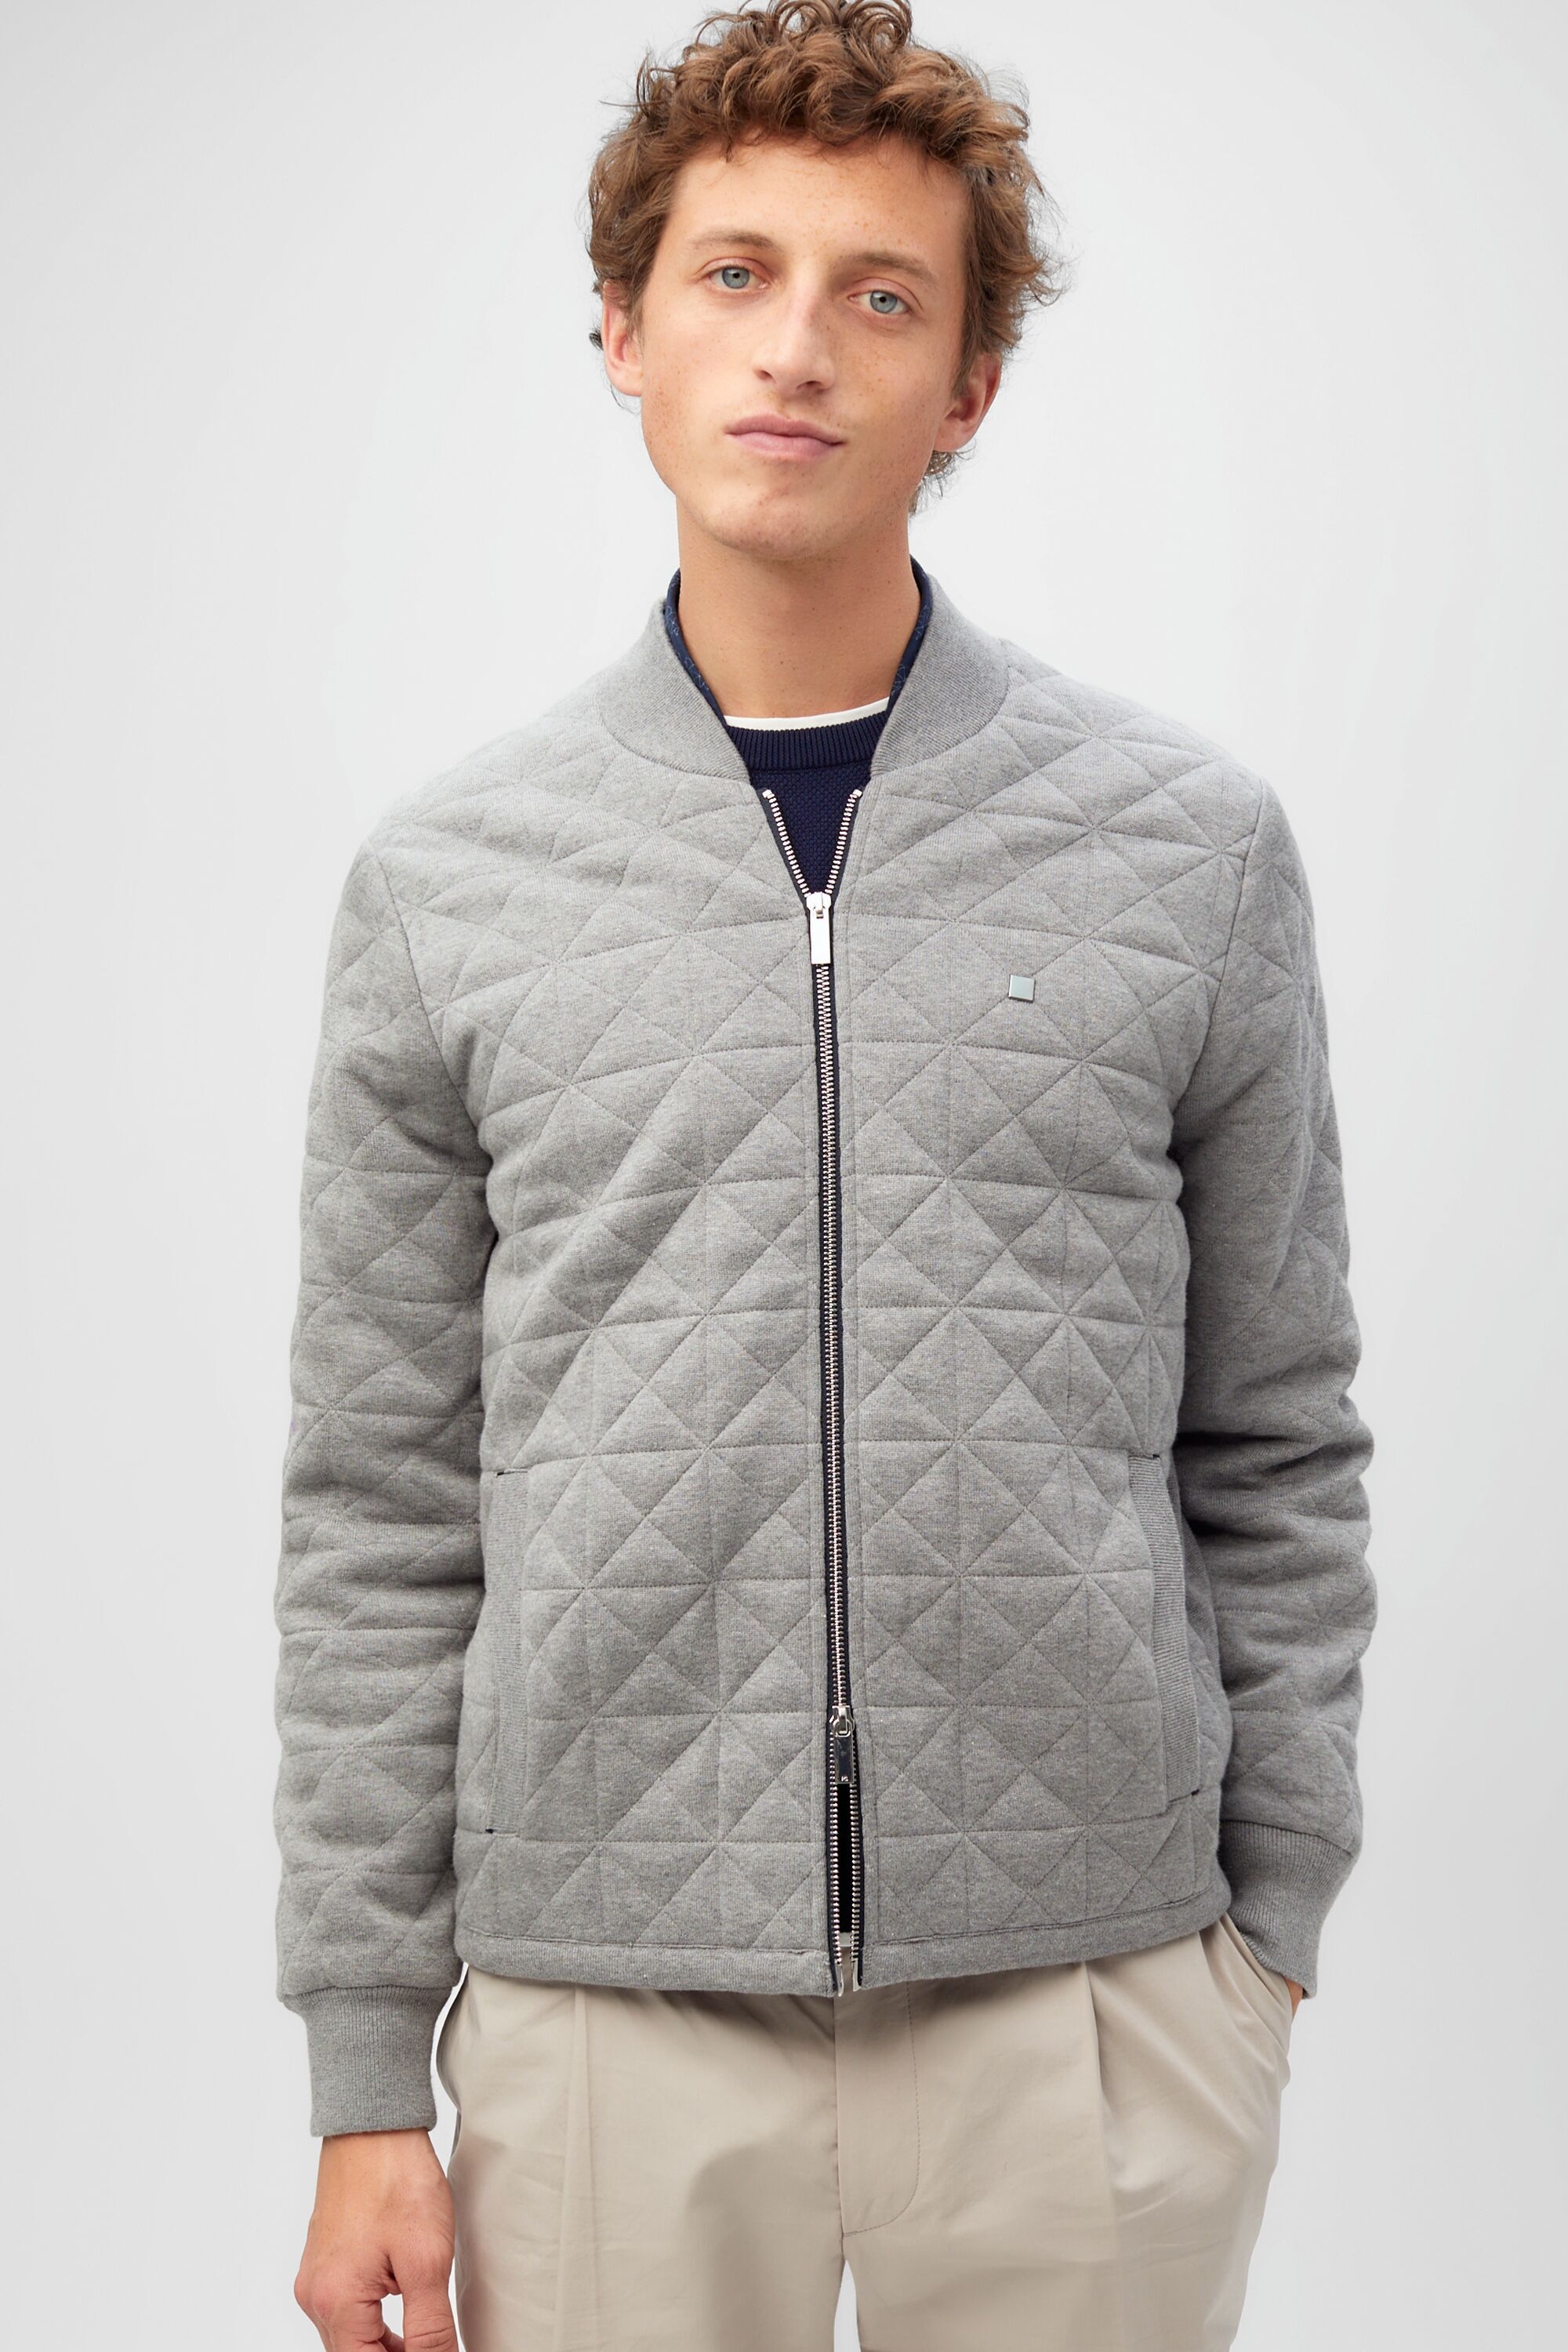 Origami quilted cotton bomber jacket